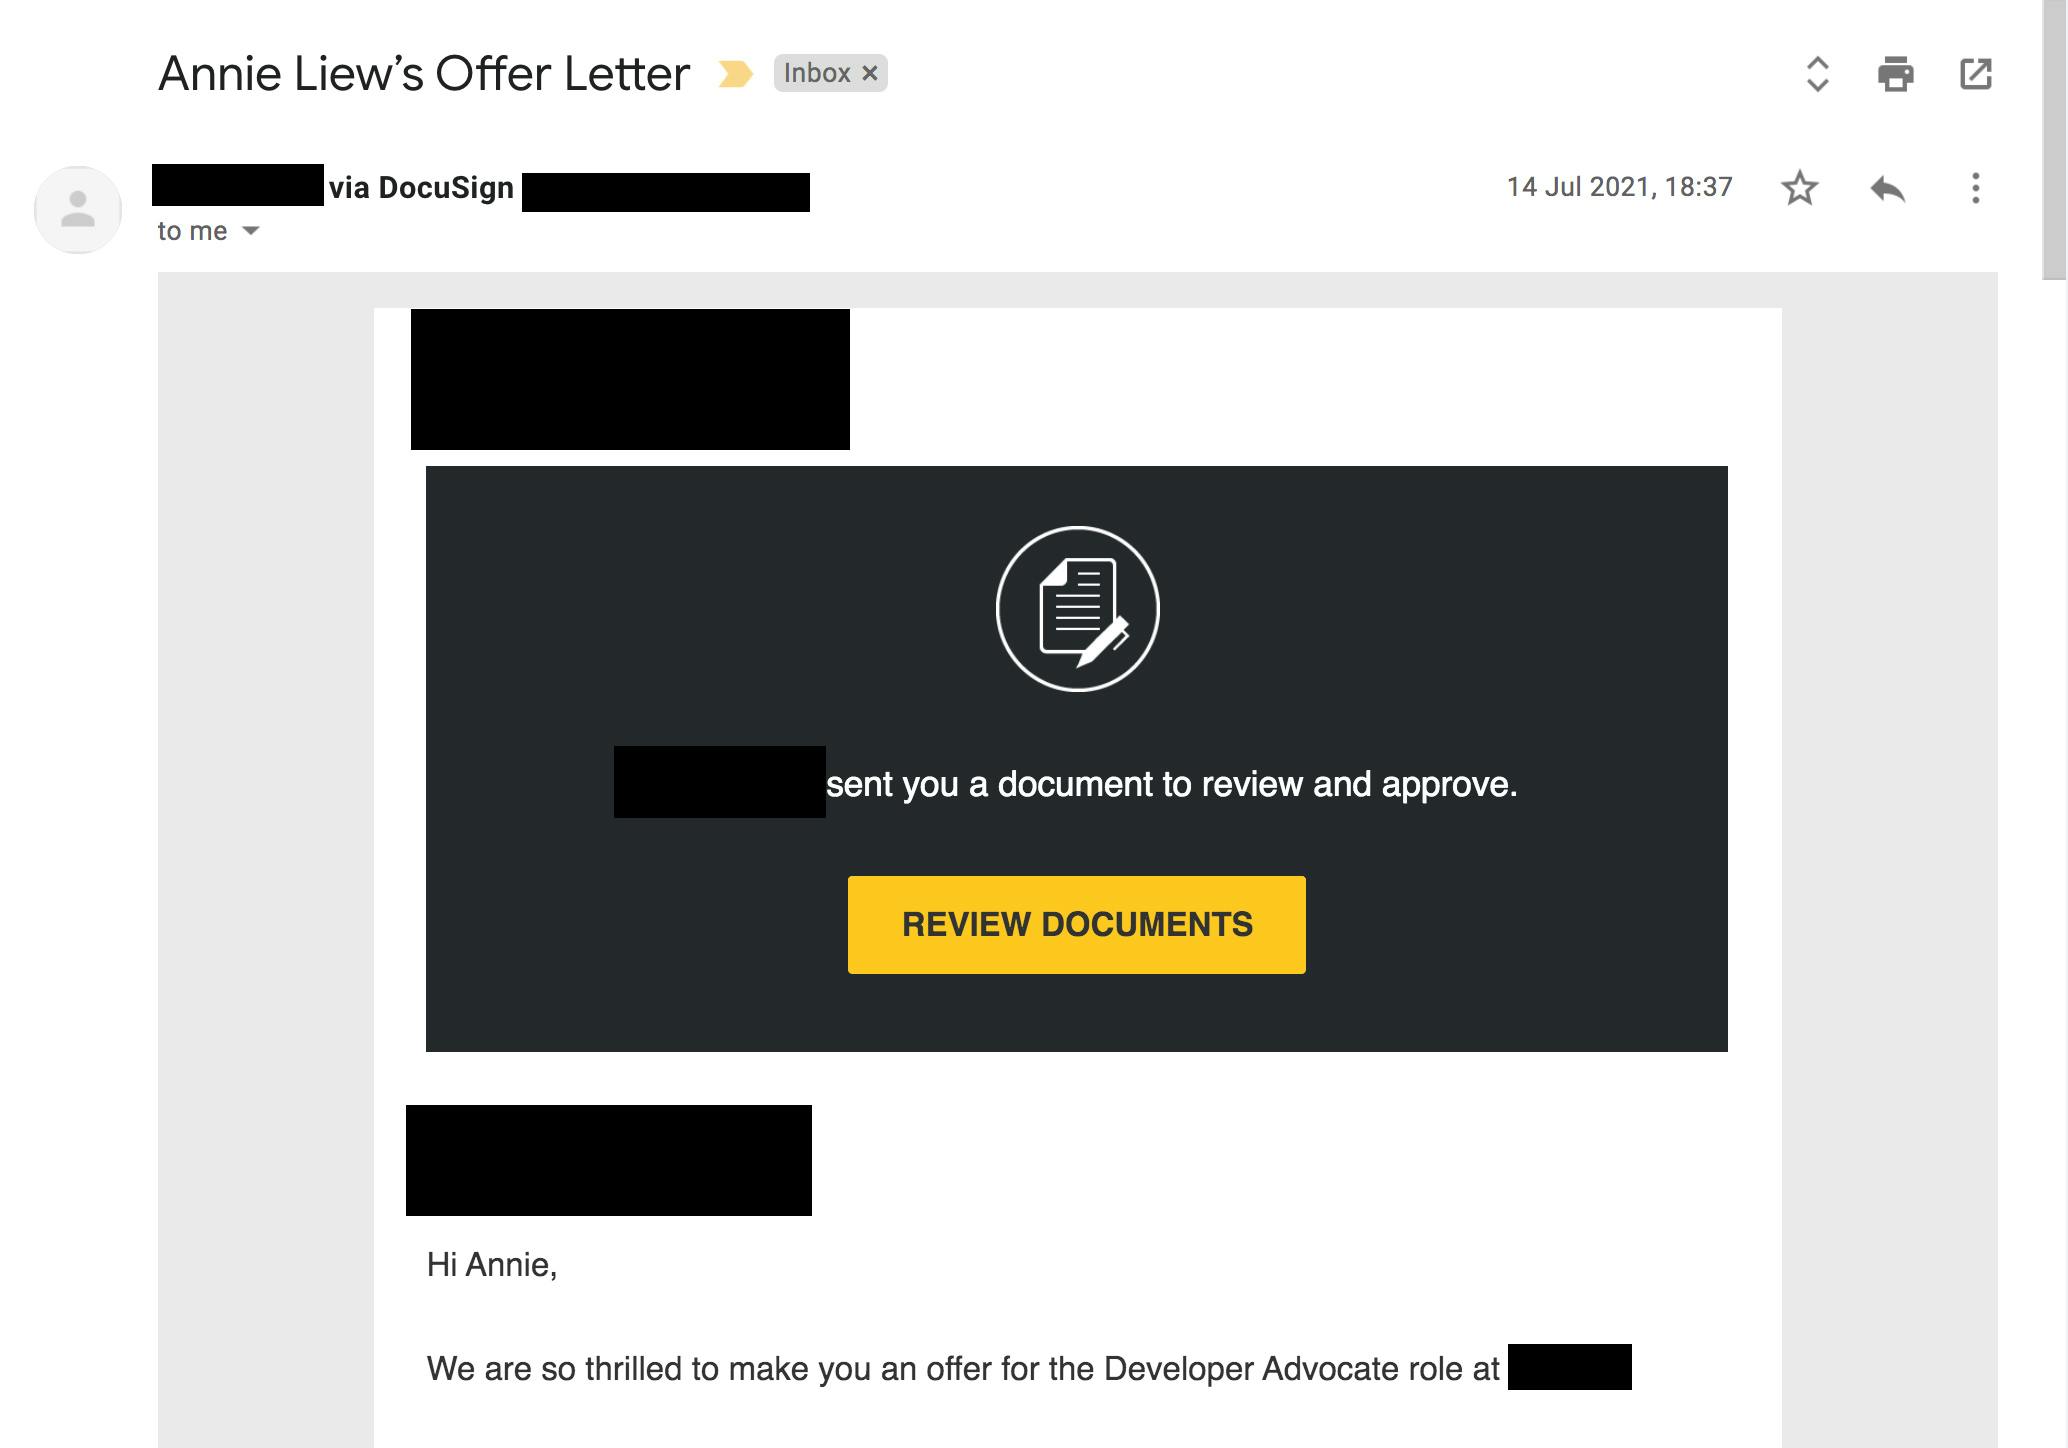 Email of an offer letter from DocuSign with company identifying information blacked out